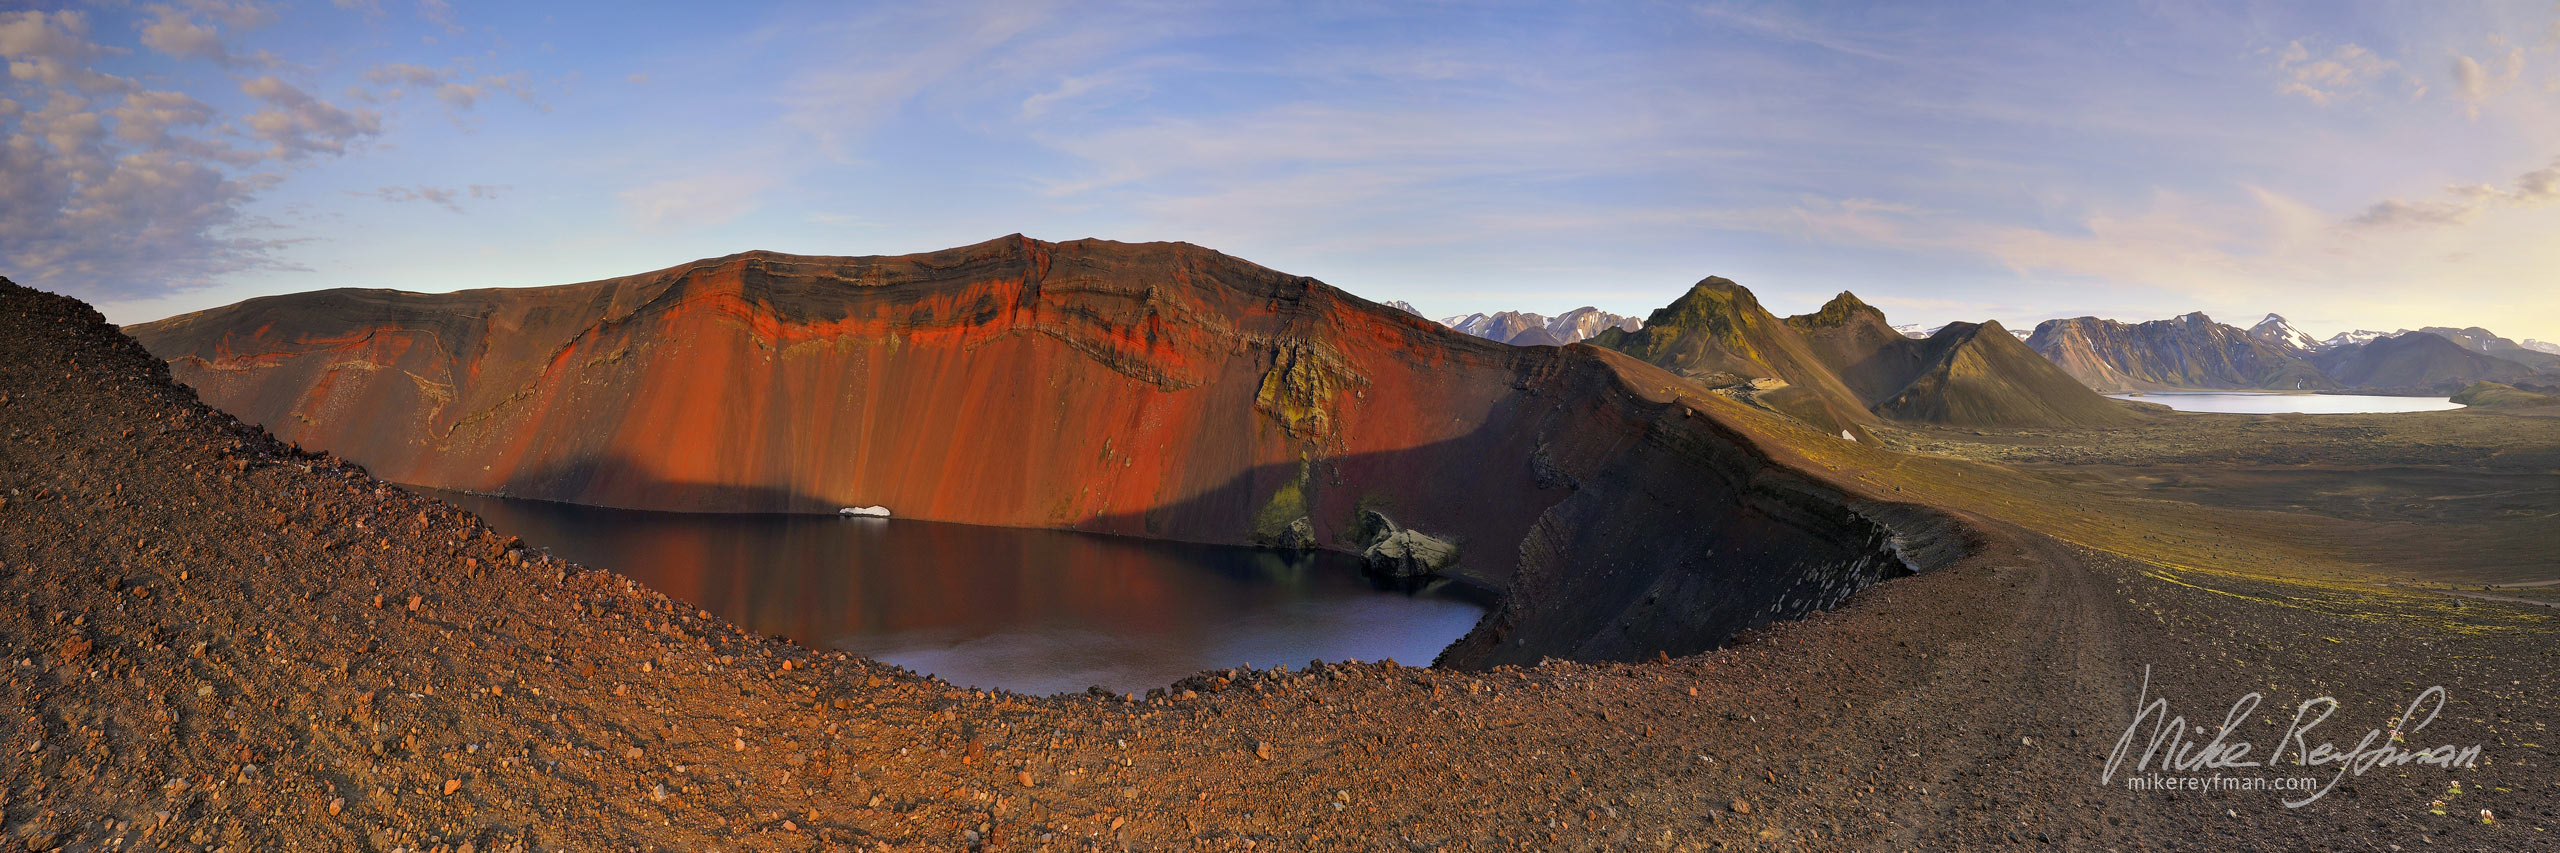 Hnausapollur (also called Blahylur & Ljotipollur) crater  lake.  Domadalur, Central Highlands, Iceland. 054-IC-GP-_M3X5161-4_Pano-1x3 - Rhyolite Mountains, Crater Lakes, Geothermal Areas, Lava Fields and Glacial Rivers. Iceland.  - Mike Reyfman Photography